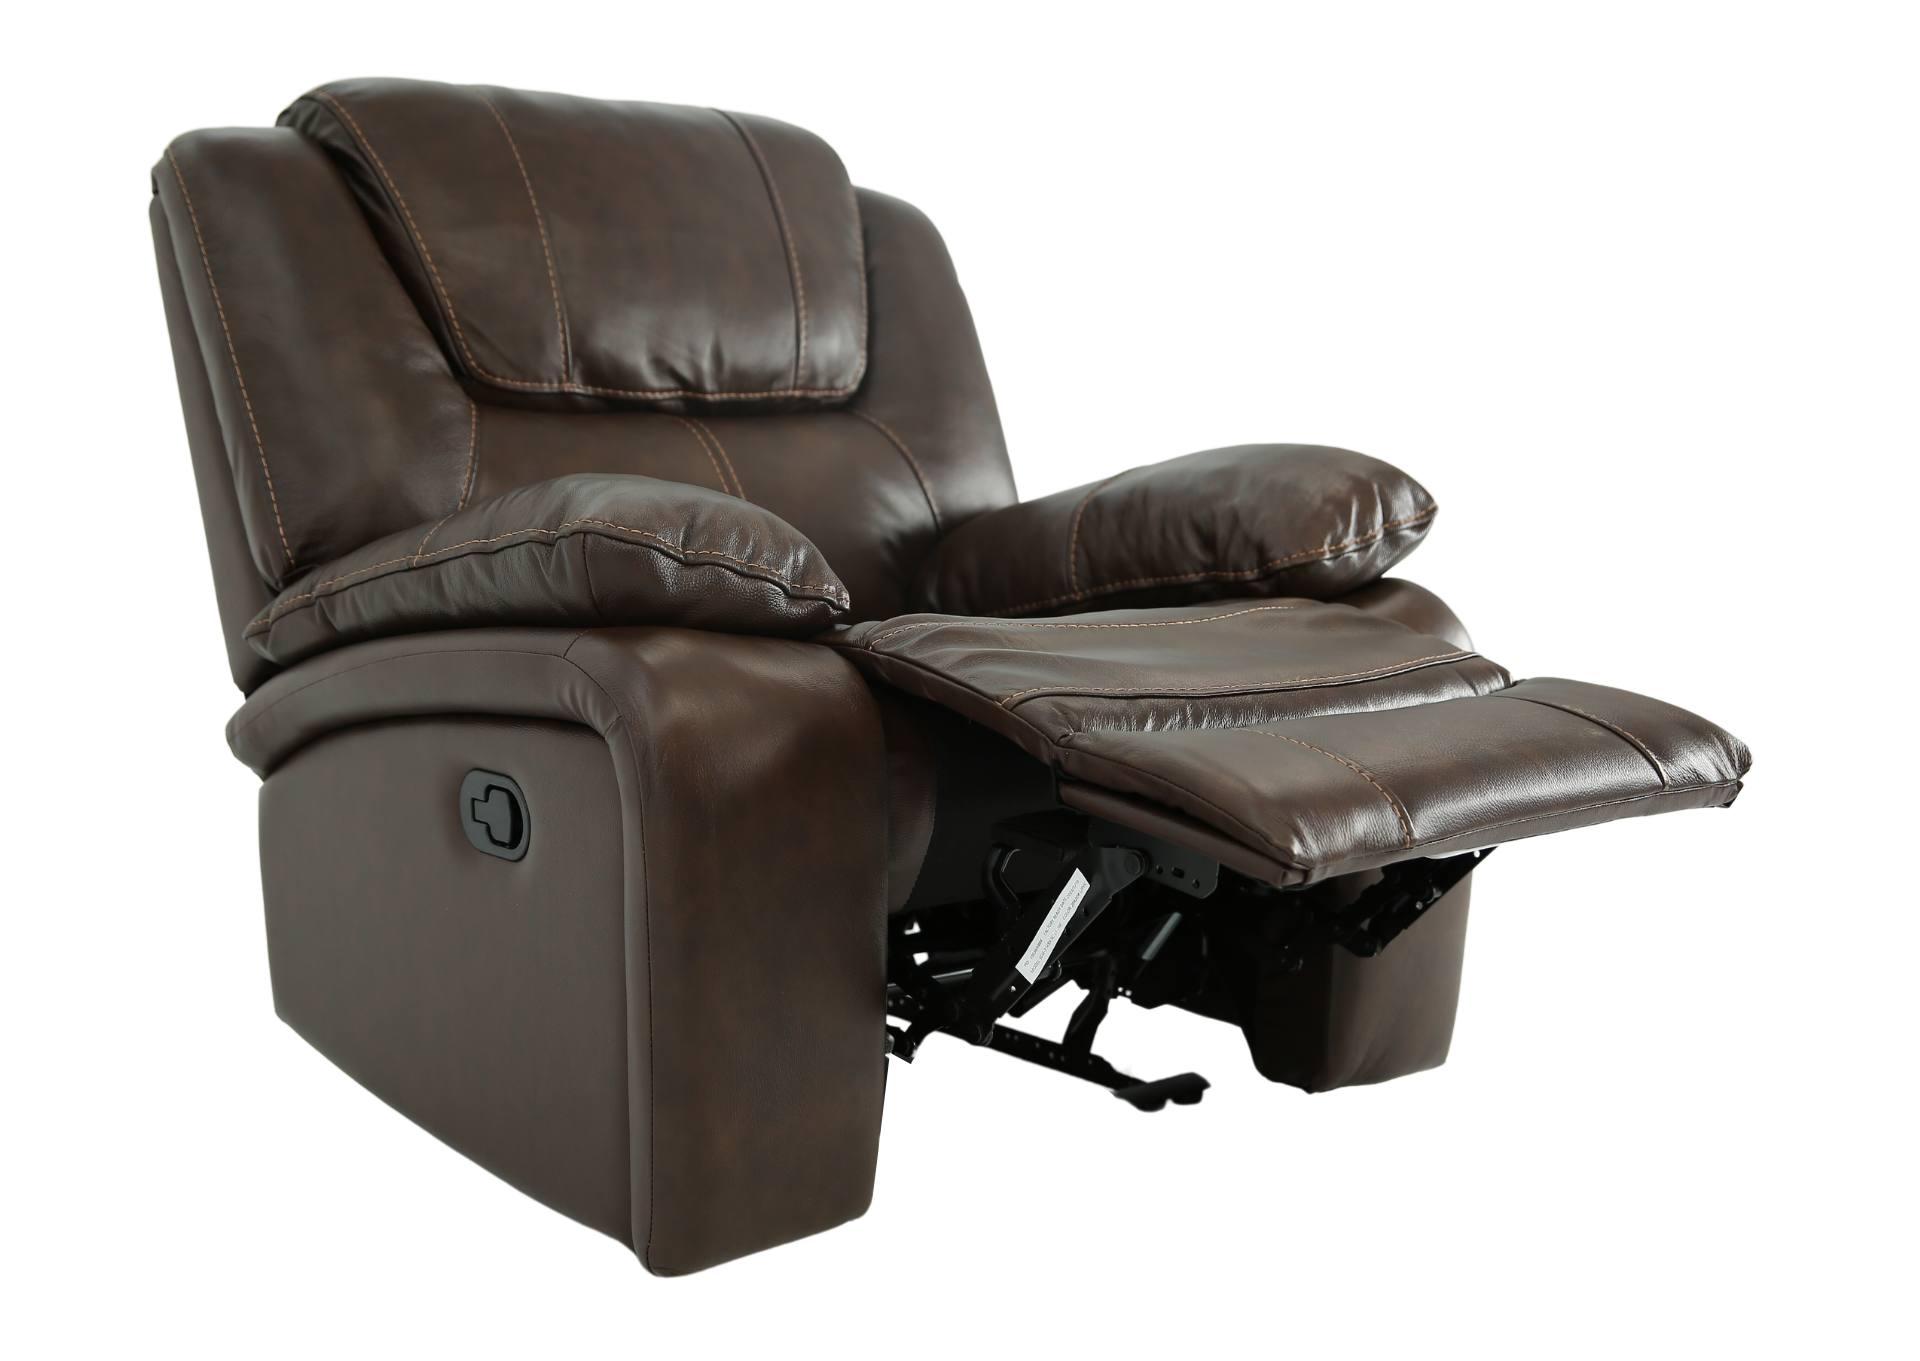 EASTON TOBACCO LEATHER RECLINER,CHEERS